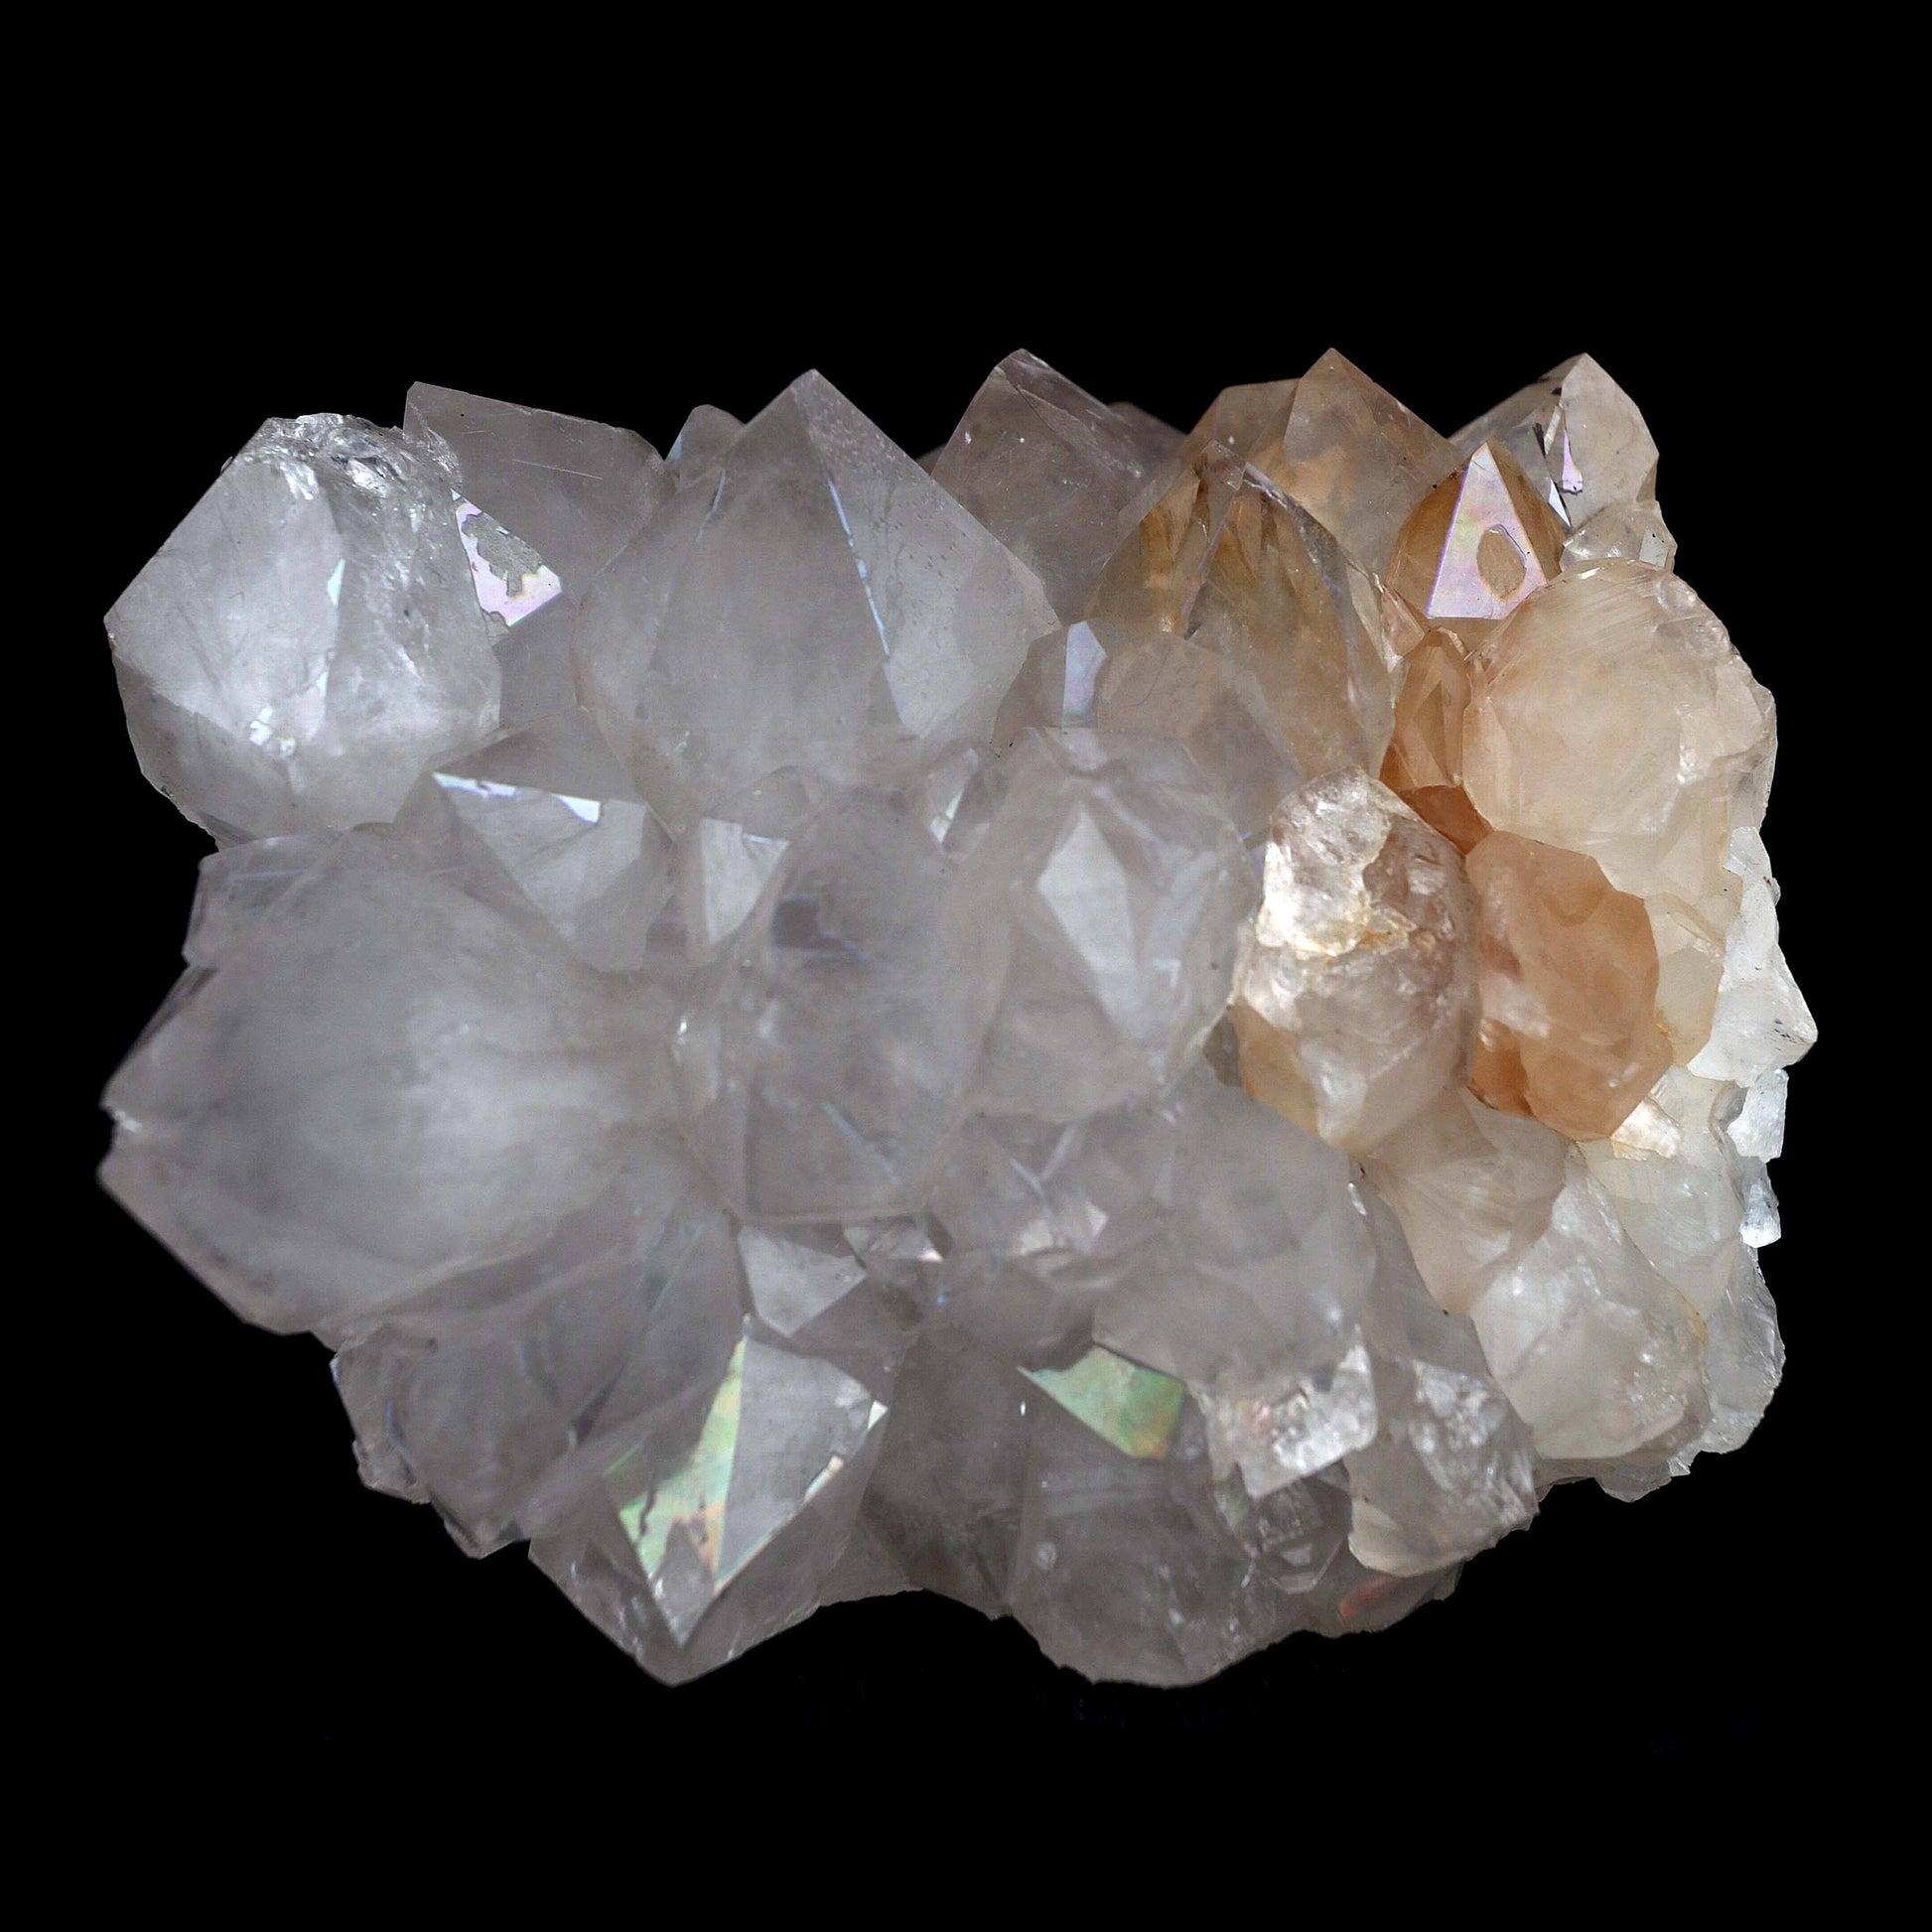 MM Quartz with Rainbow Effect 'Anandalite' Natural Mineral Specimen #…  https://www.superbminerals.us/products/mm-quartz-with-rainbow-effect-anandalite-natural-mineral-specimen-b-4594  Features:Anandalite is mined in India and is also known as Aurora Quartz or Rainbow Quartz. The clusters' tiny tips reflect luminous rainbows that arise on the quartz's surface (as opposed to the internal rainbows that reflect from within in other mineral specimens.) Surface rainbow reflections